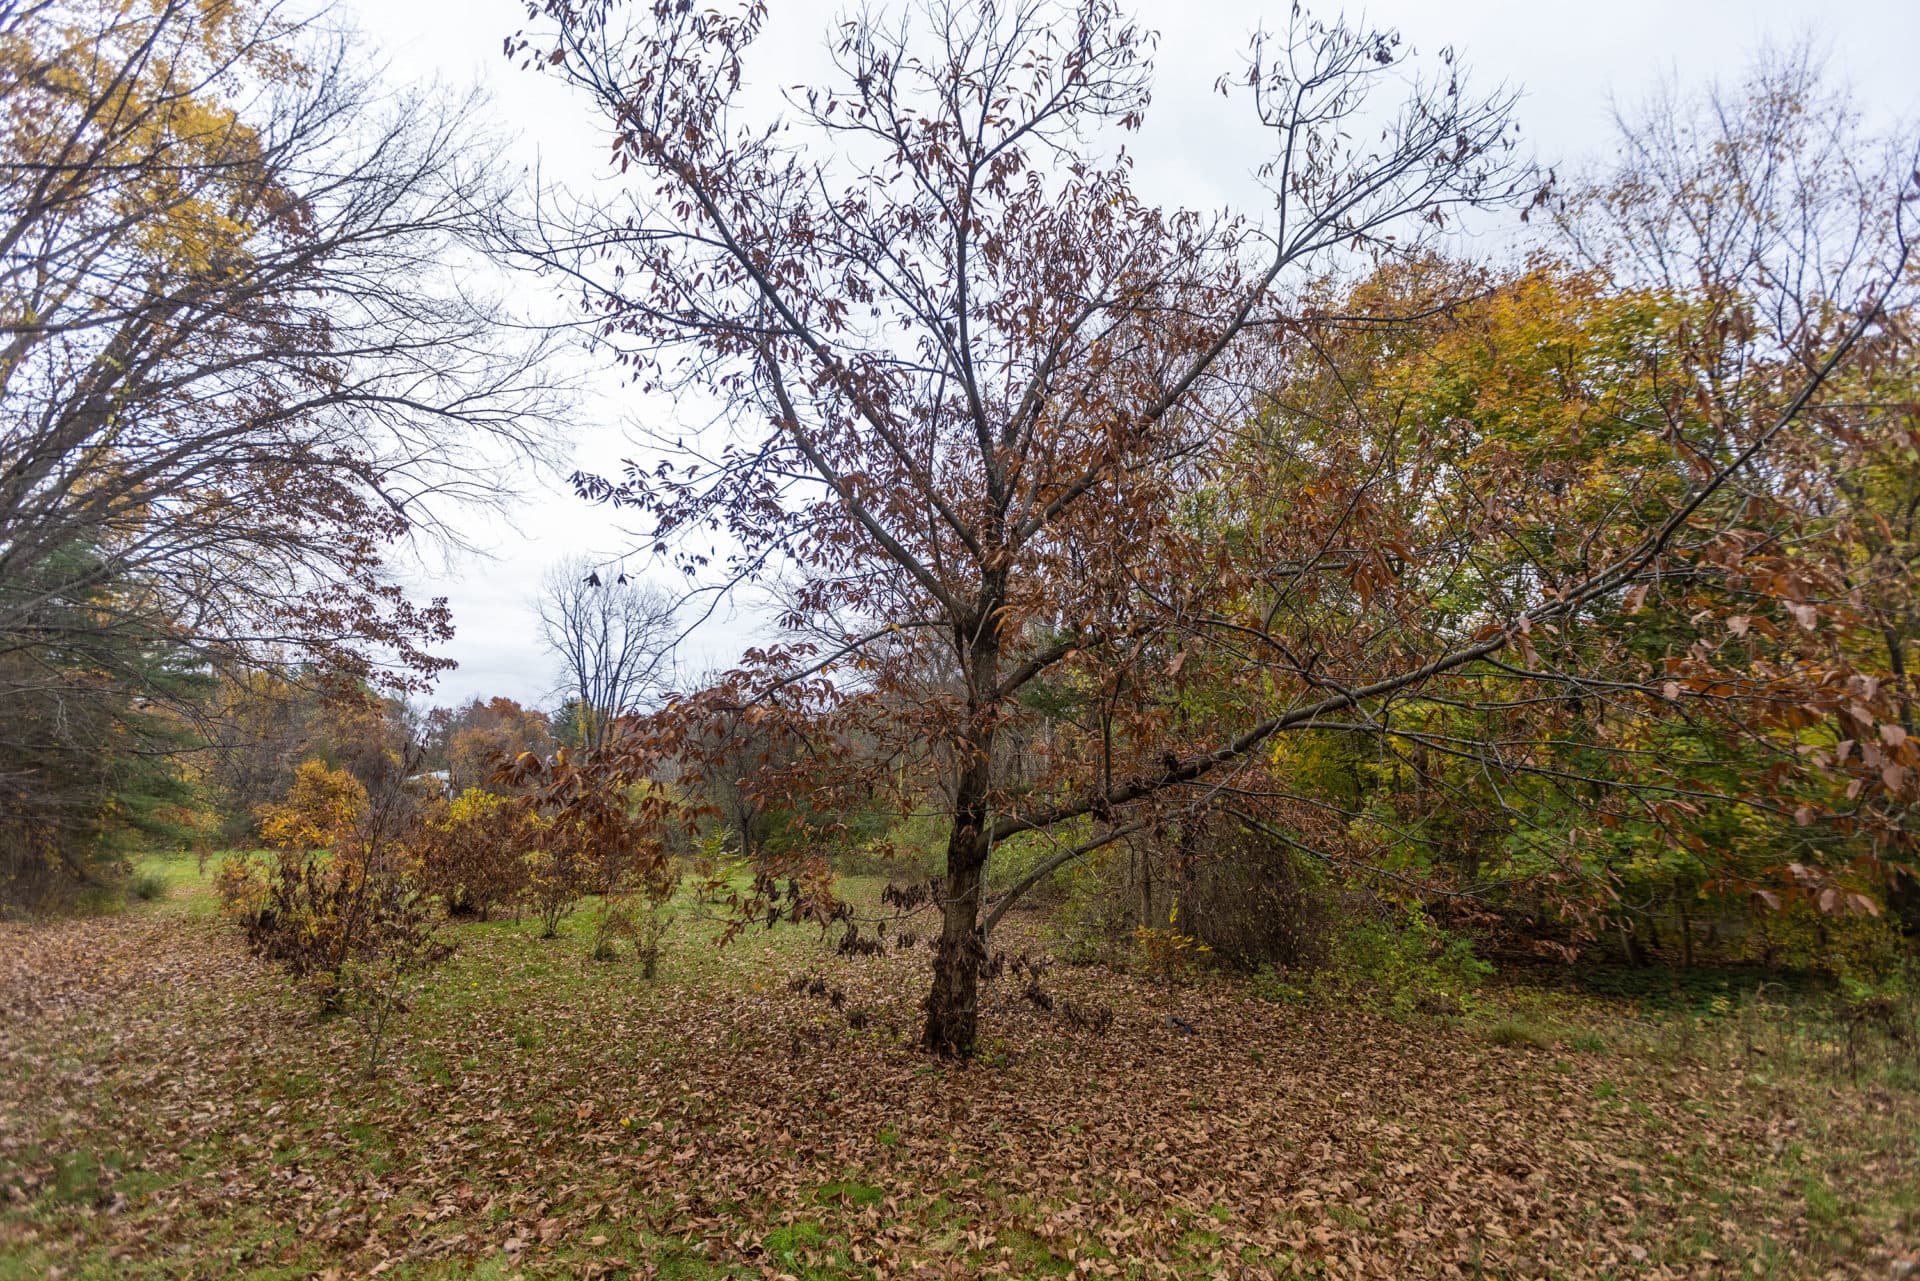 A young healthy chestnut tree hybrid in Lincoln. (Jesse Costa/WBUR)